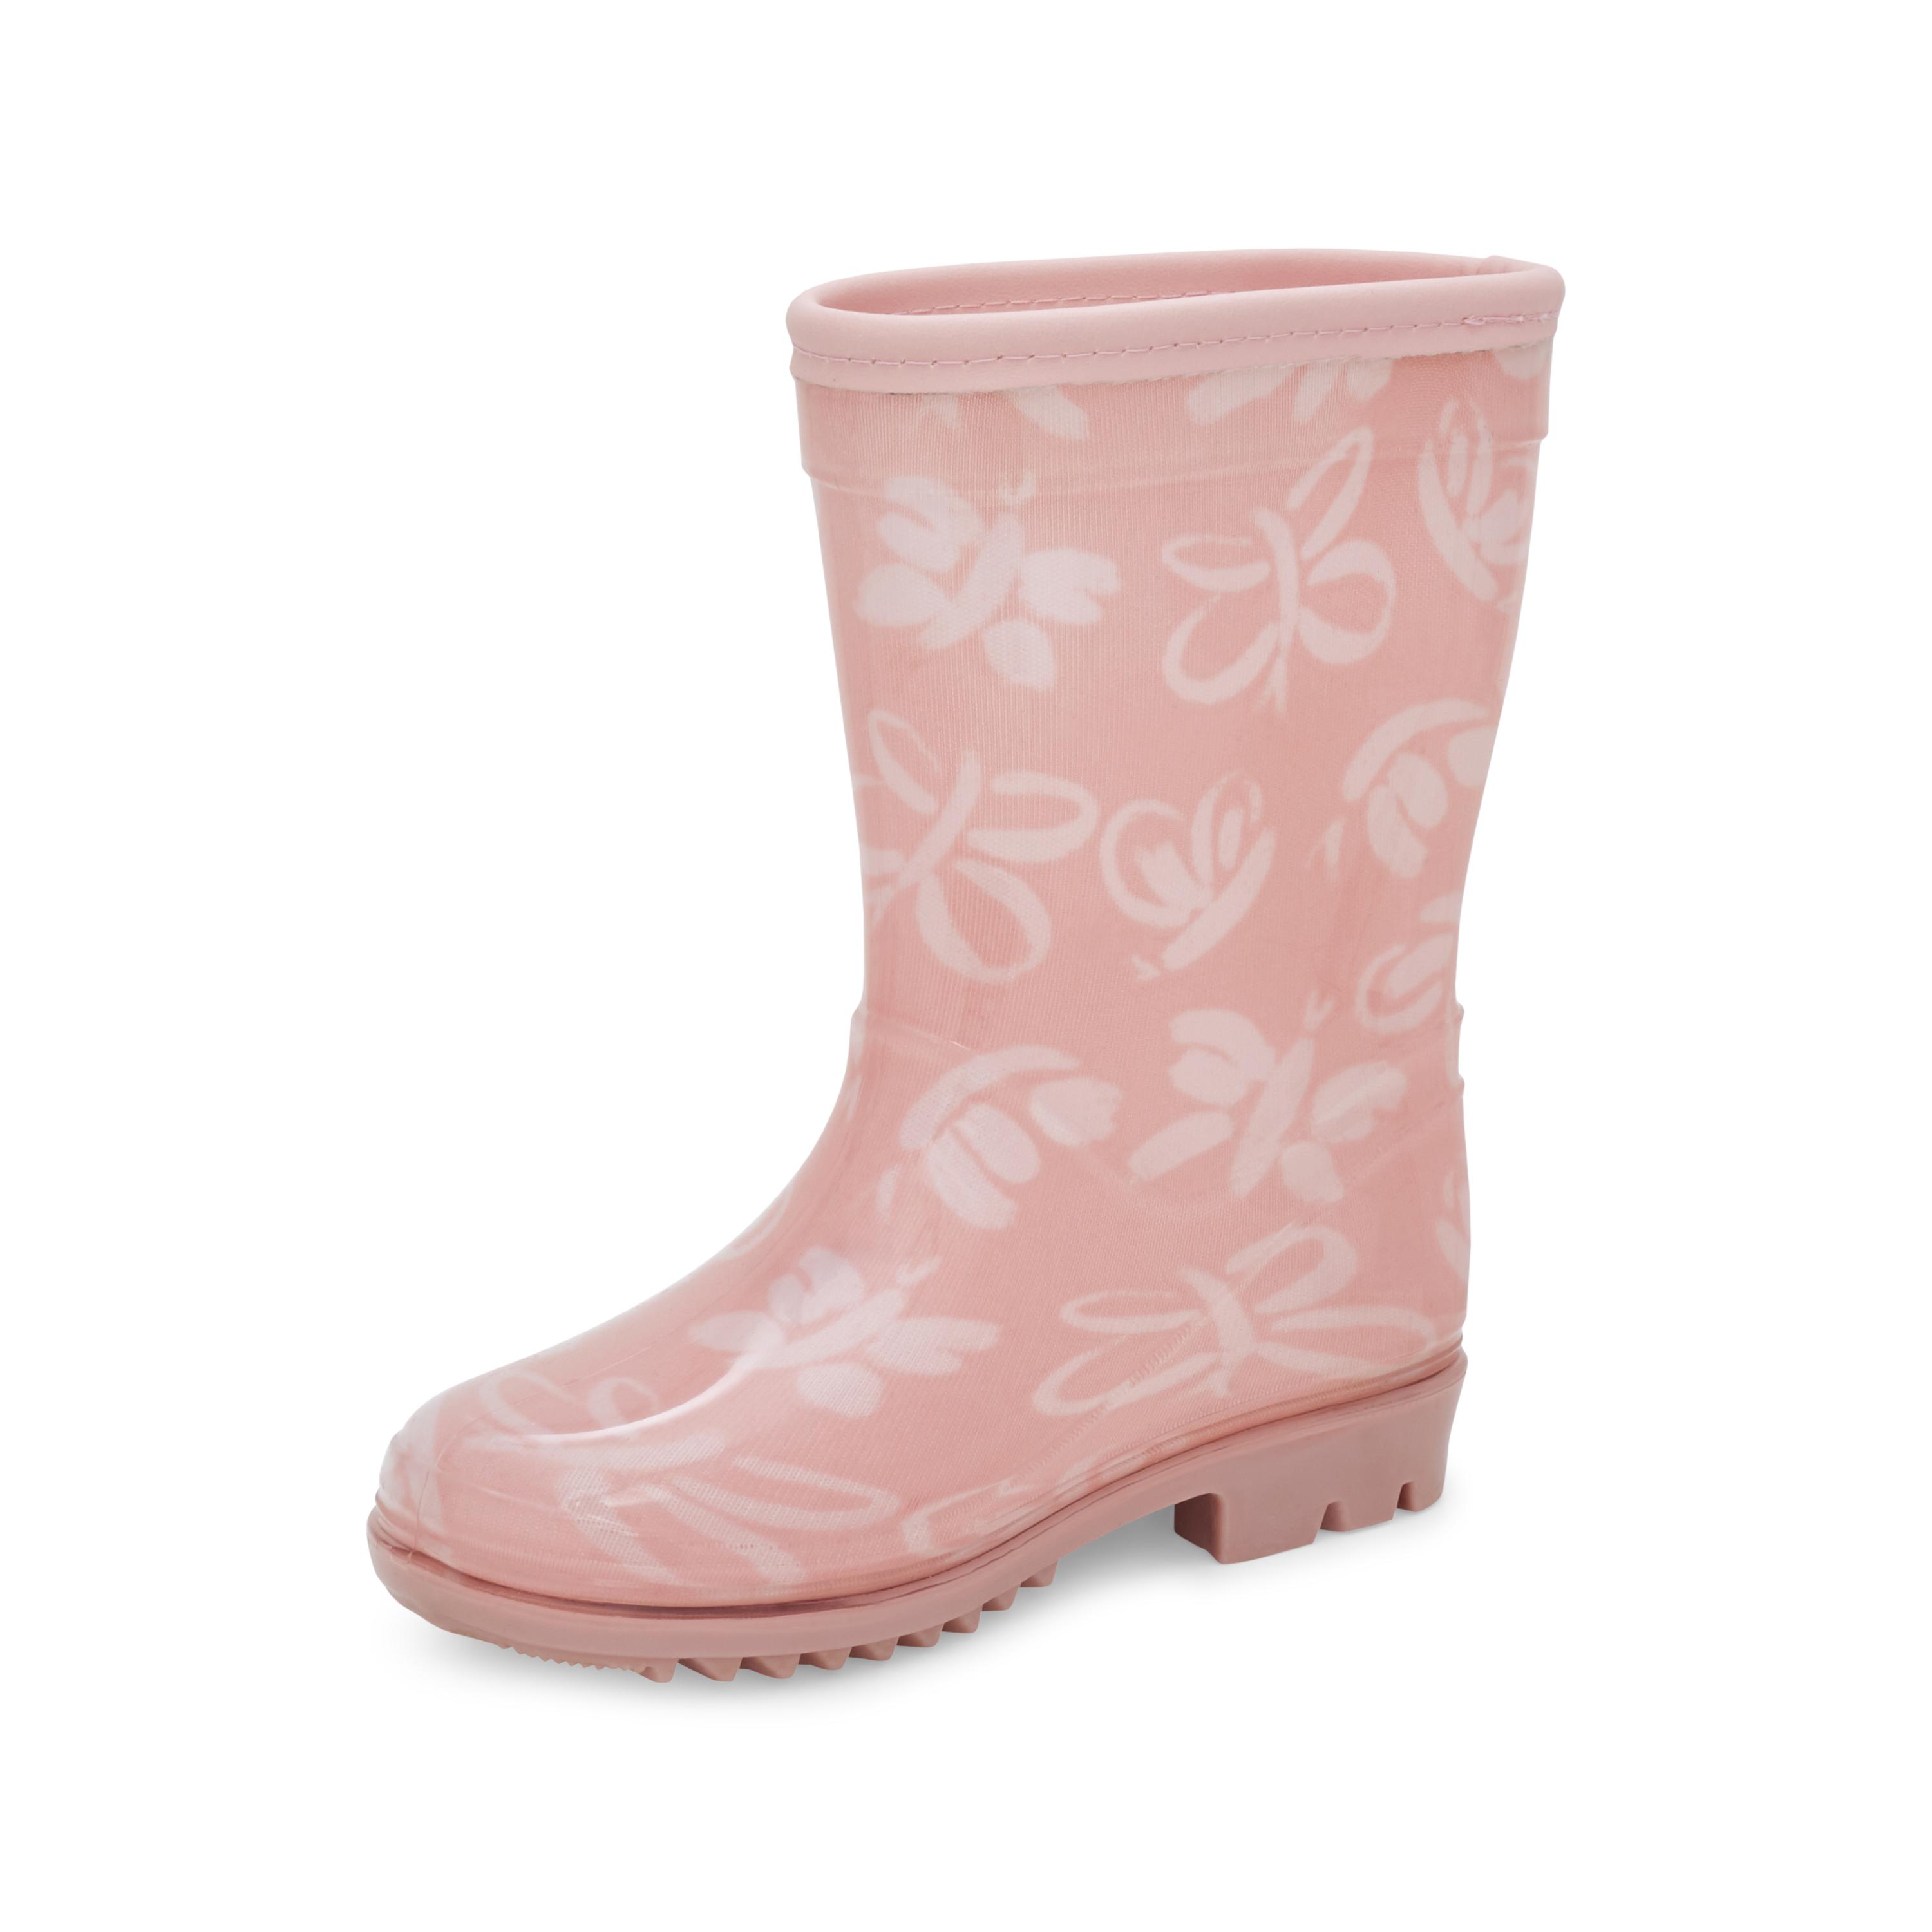 Toddler Butterfly Rain Boots